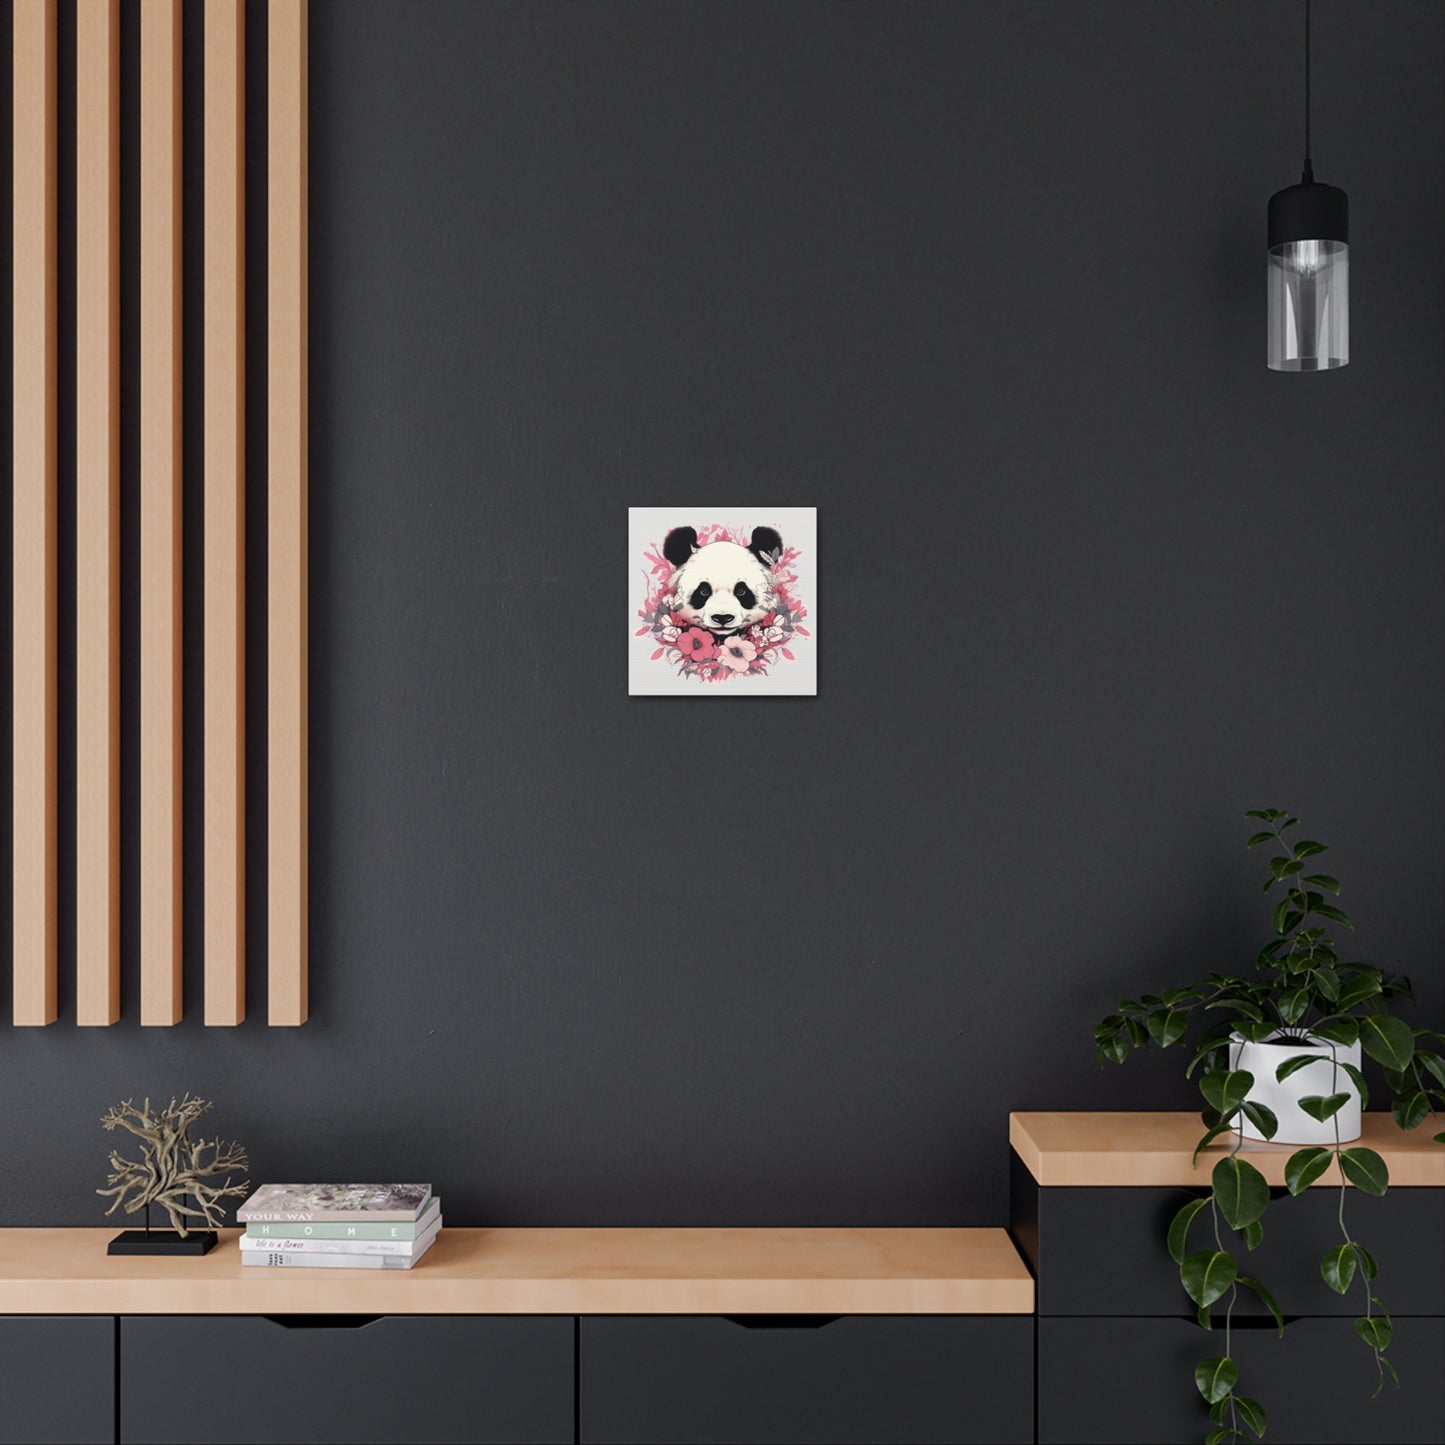 Canvas Gallery - A Panda with floral background